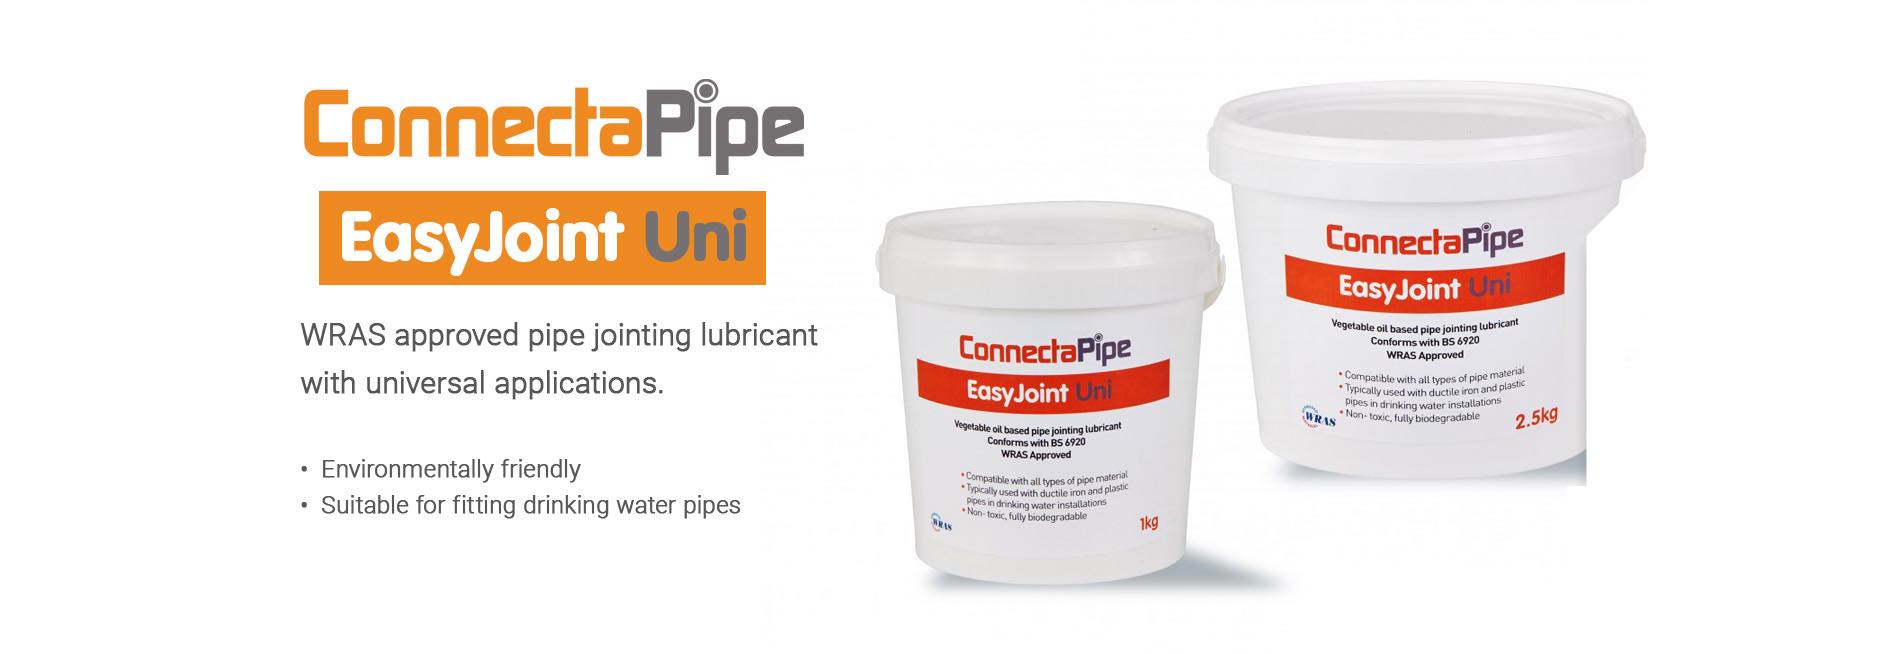 ConnectaPipe EasyJoint Uni